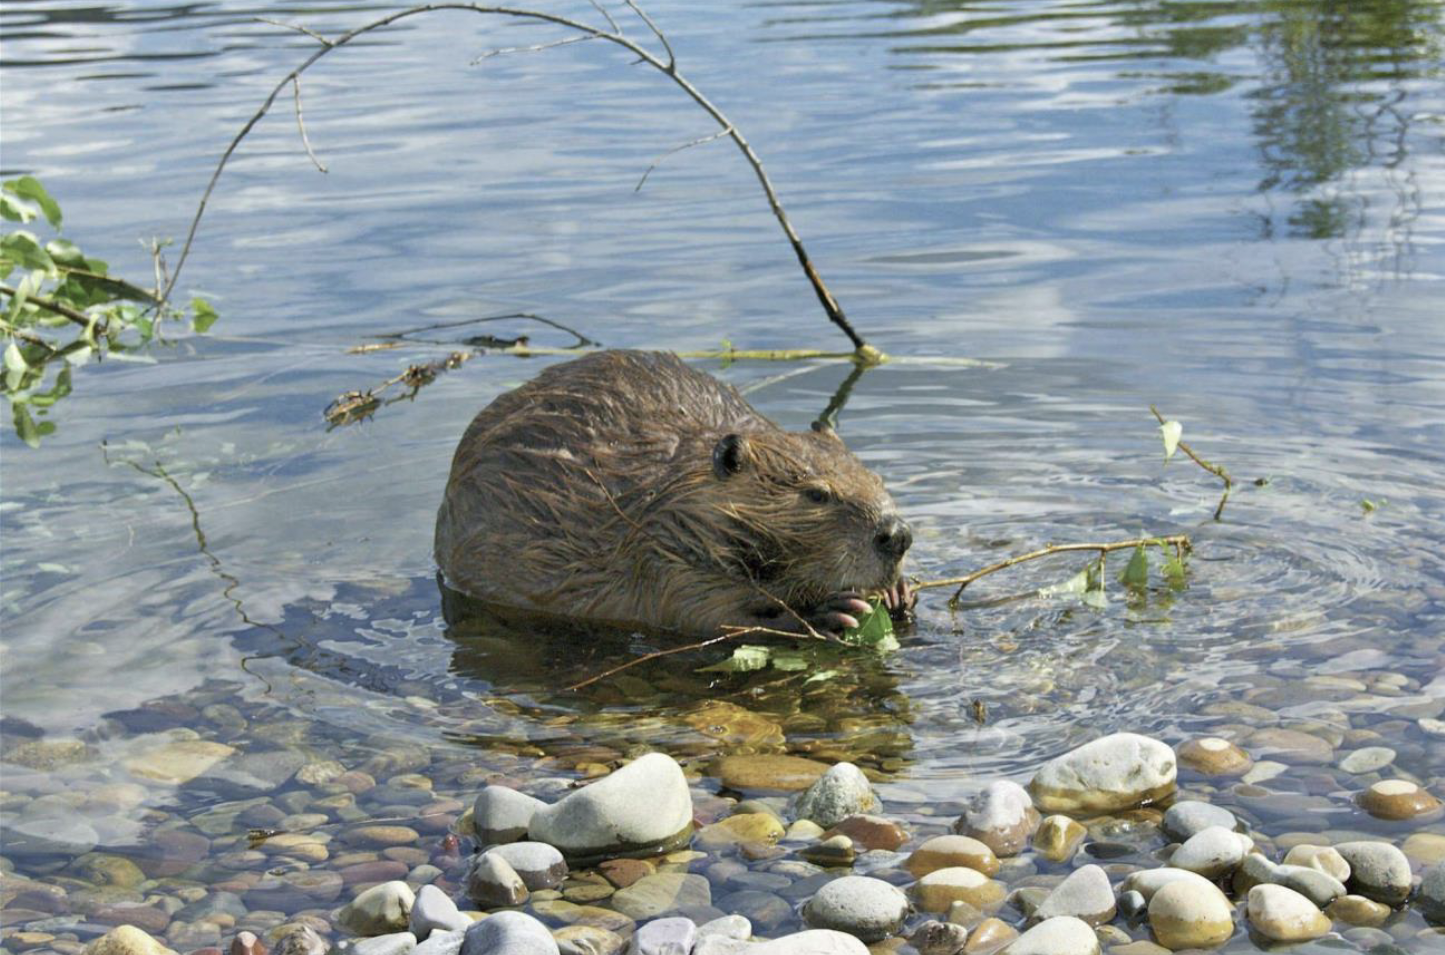 Mature beaver crouching in the water, snacking on a willow branch. The water is clear and you can see the river rocks clearly.